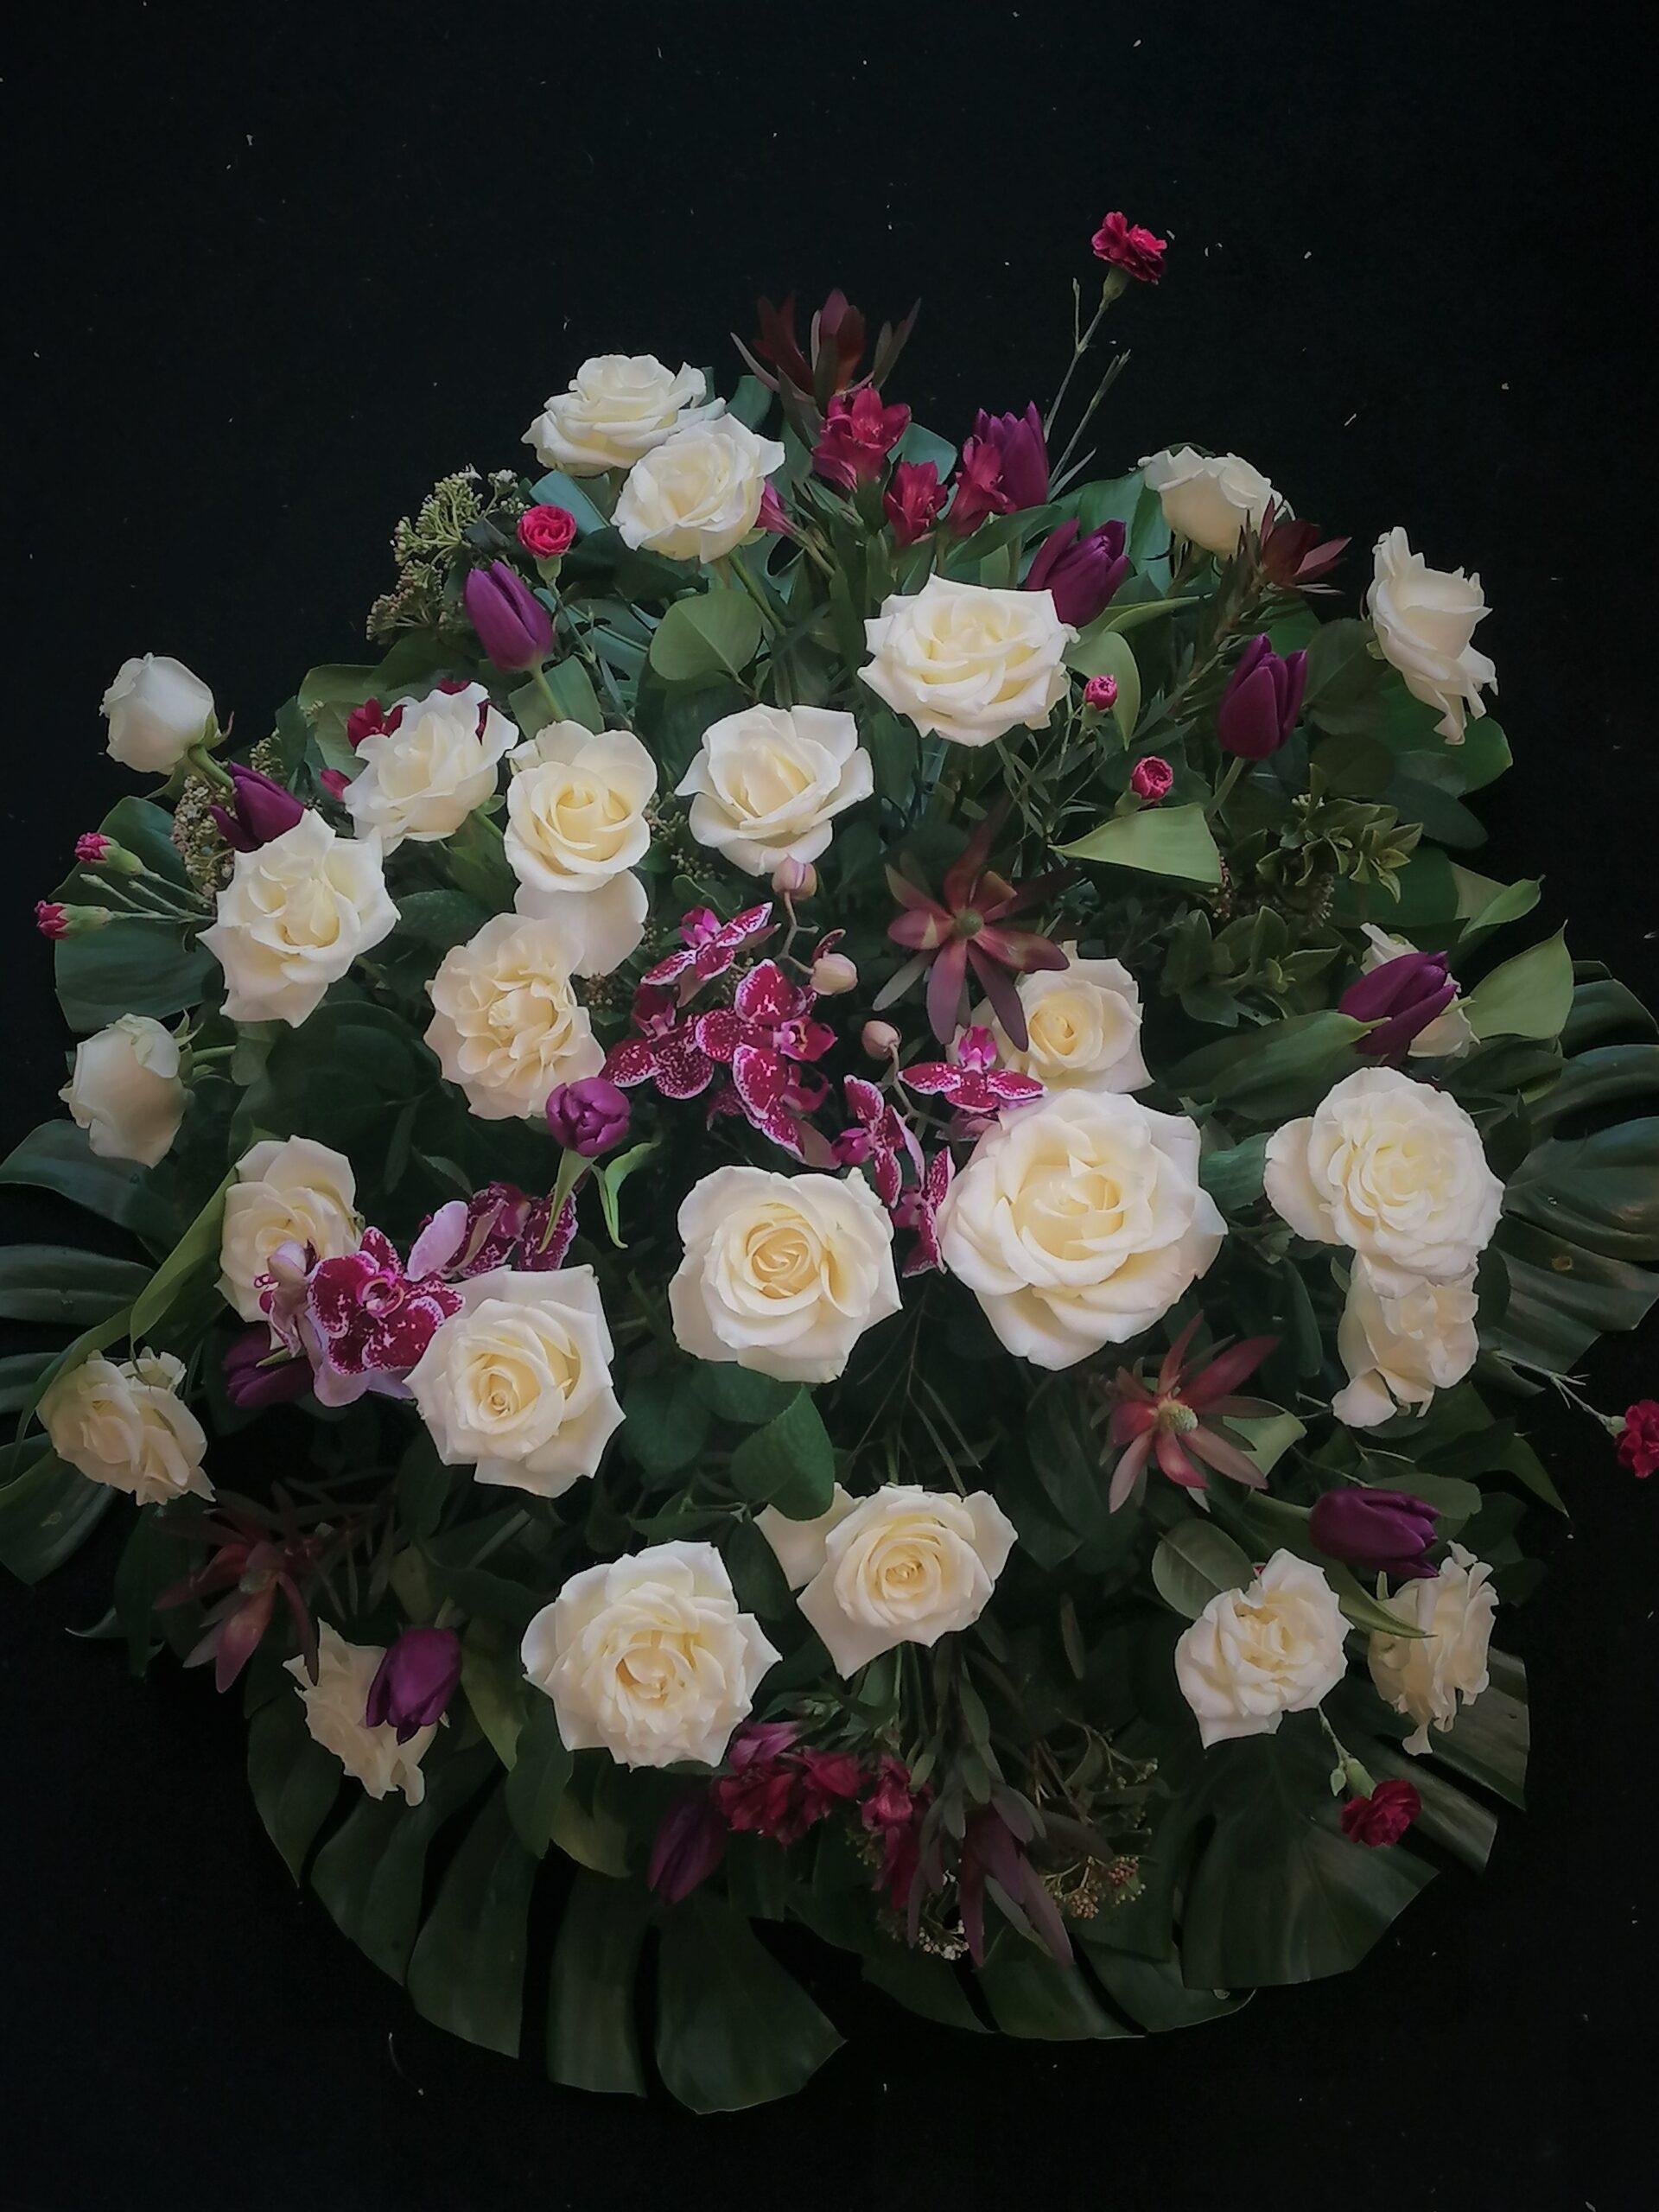 The wreath abounds with tulips, alstromeria, orchids, carnations and leucadendrons.